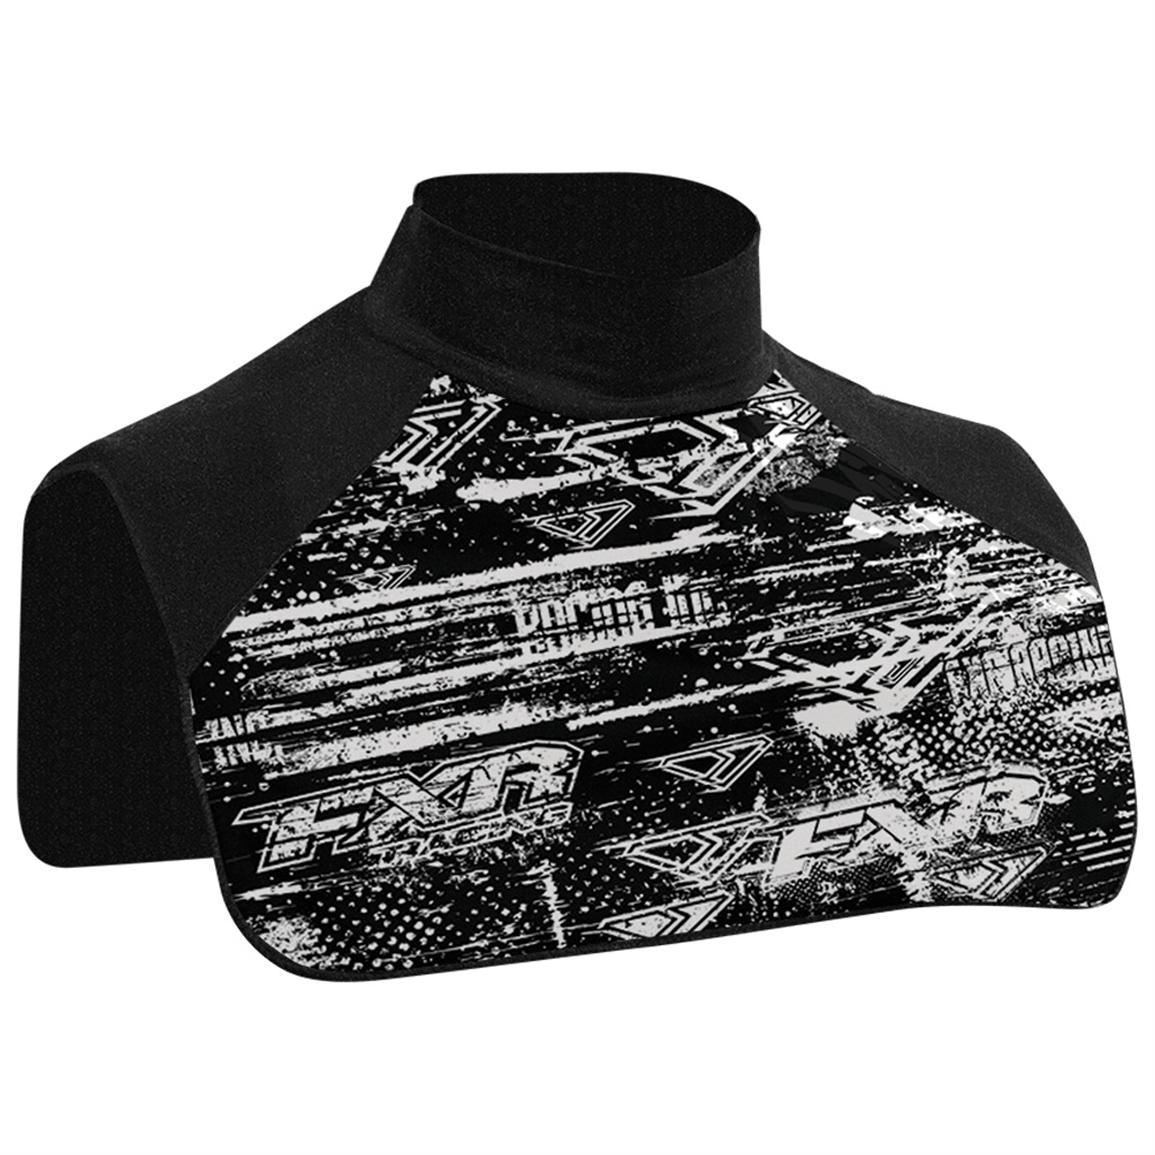 FXRÂ® Cold Stop Chest Warmer - 589930, Snowmobile Clothing at Sportsman's Guide